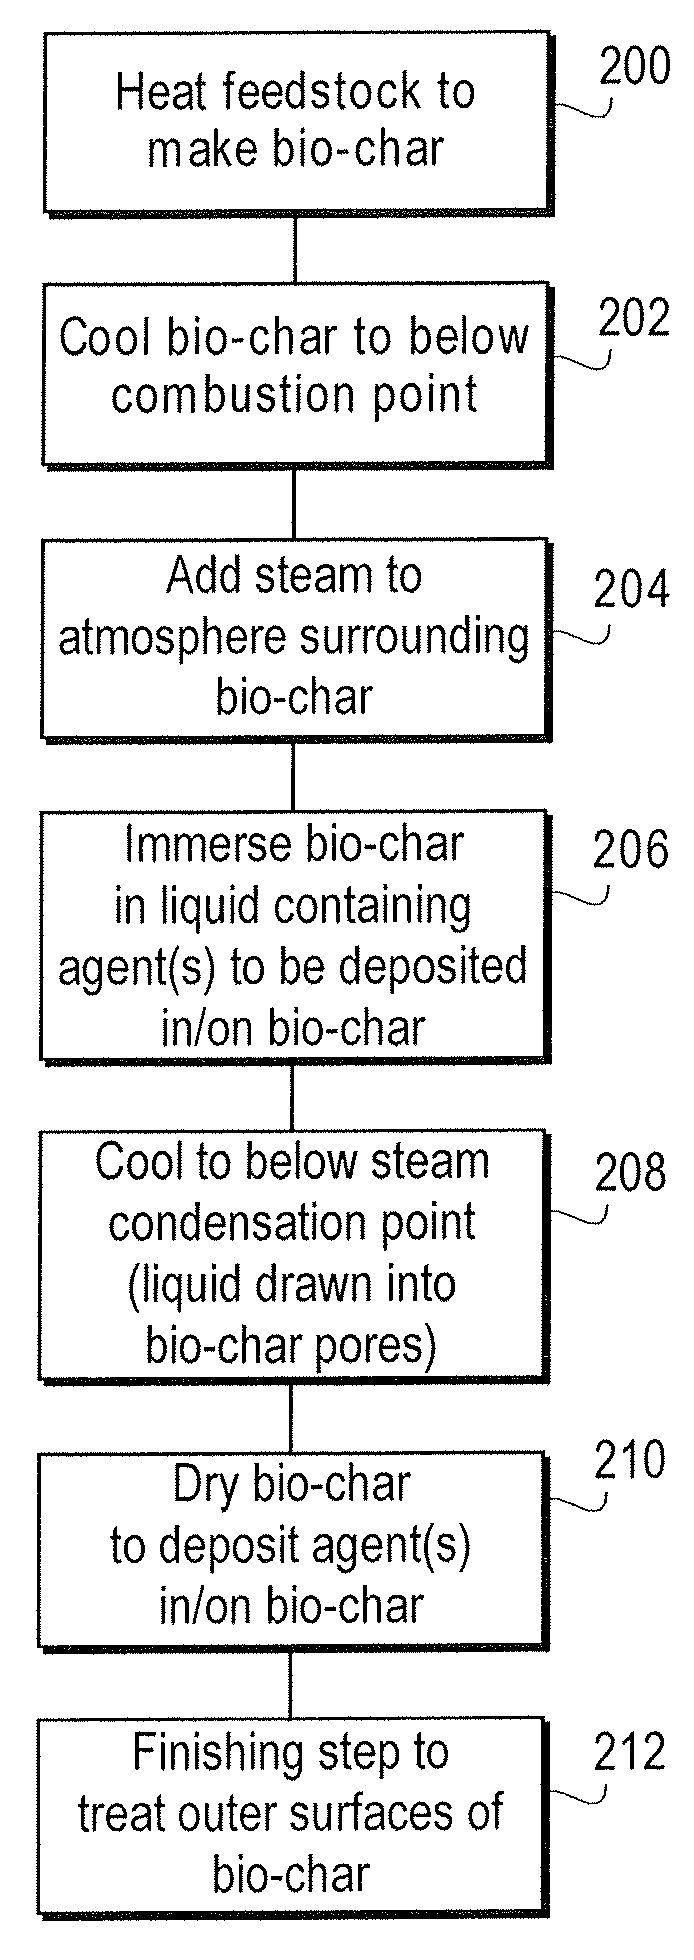 Method and apparatus for depositing agents upon and within bio-char